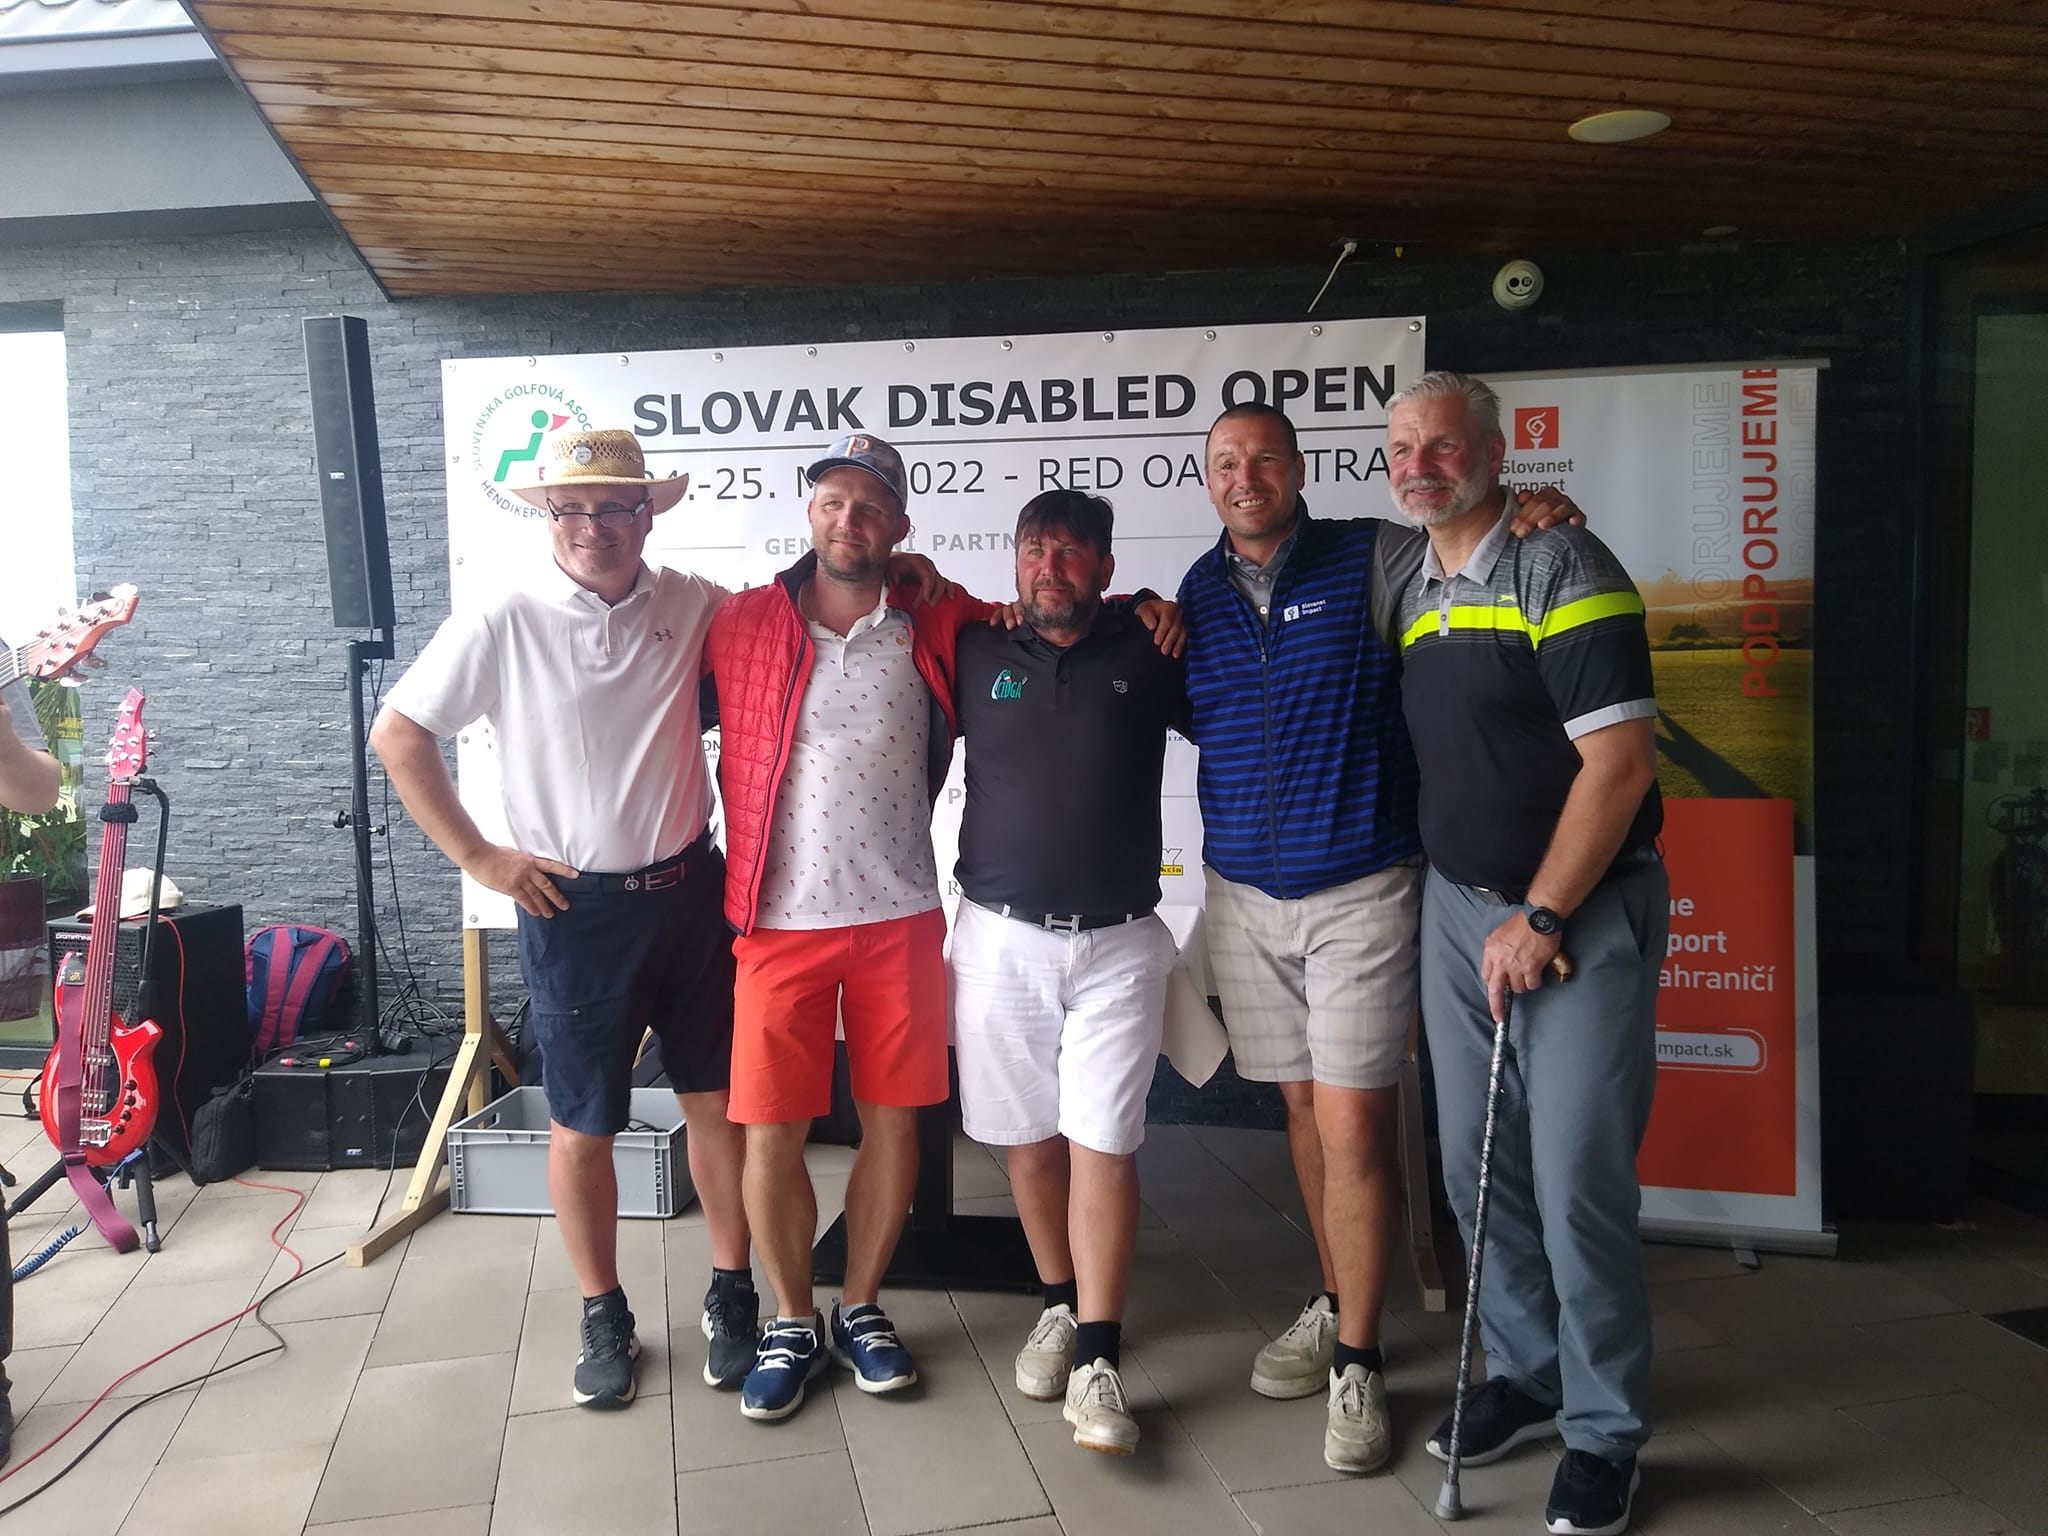 Slovak Disabled Open 2022 - H6